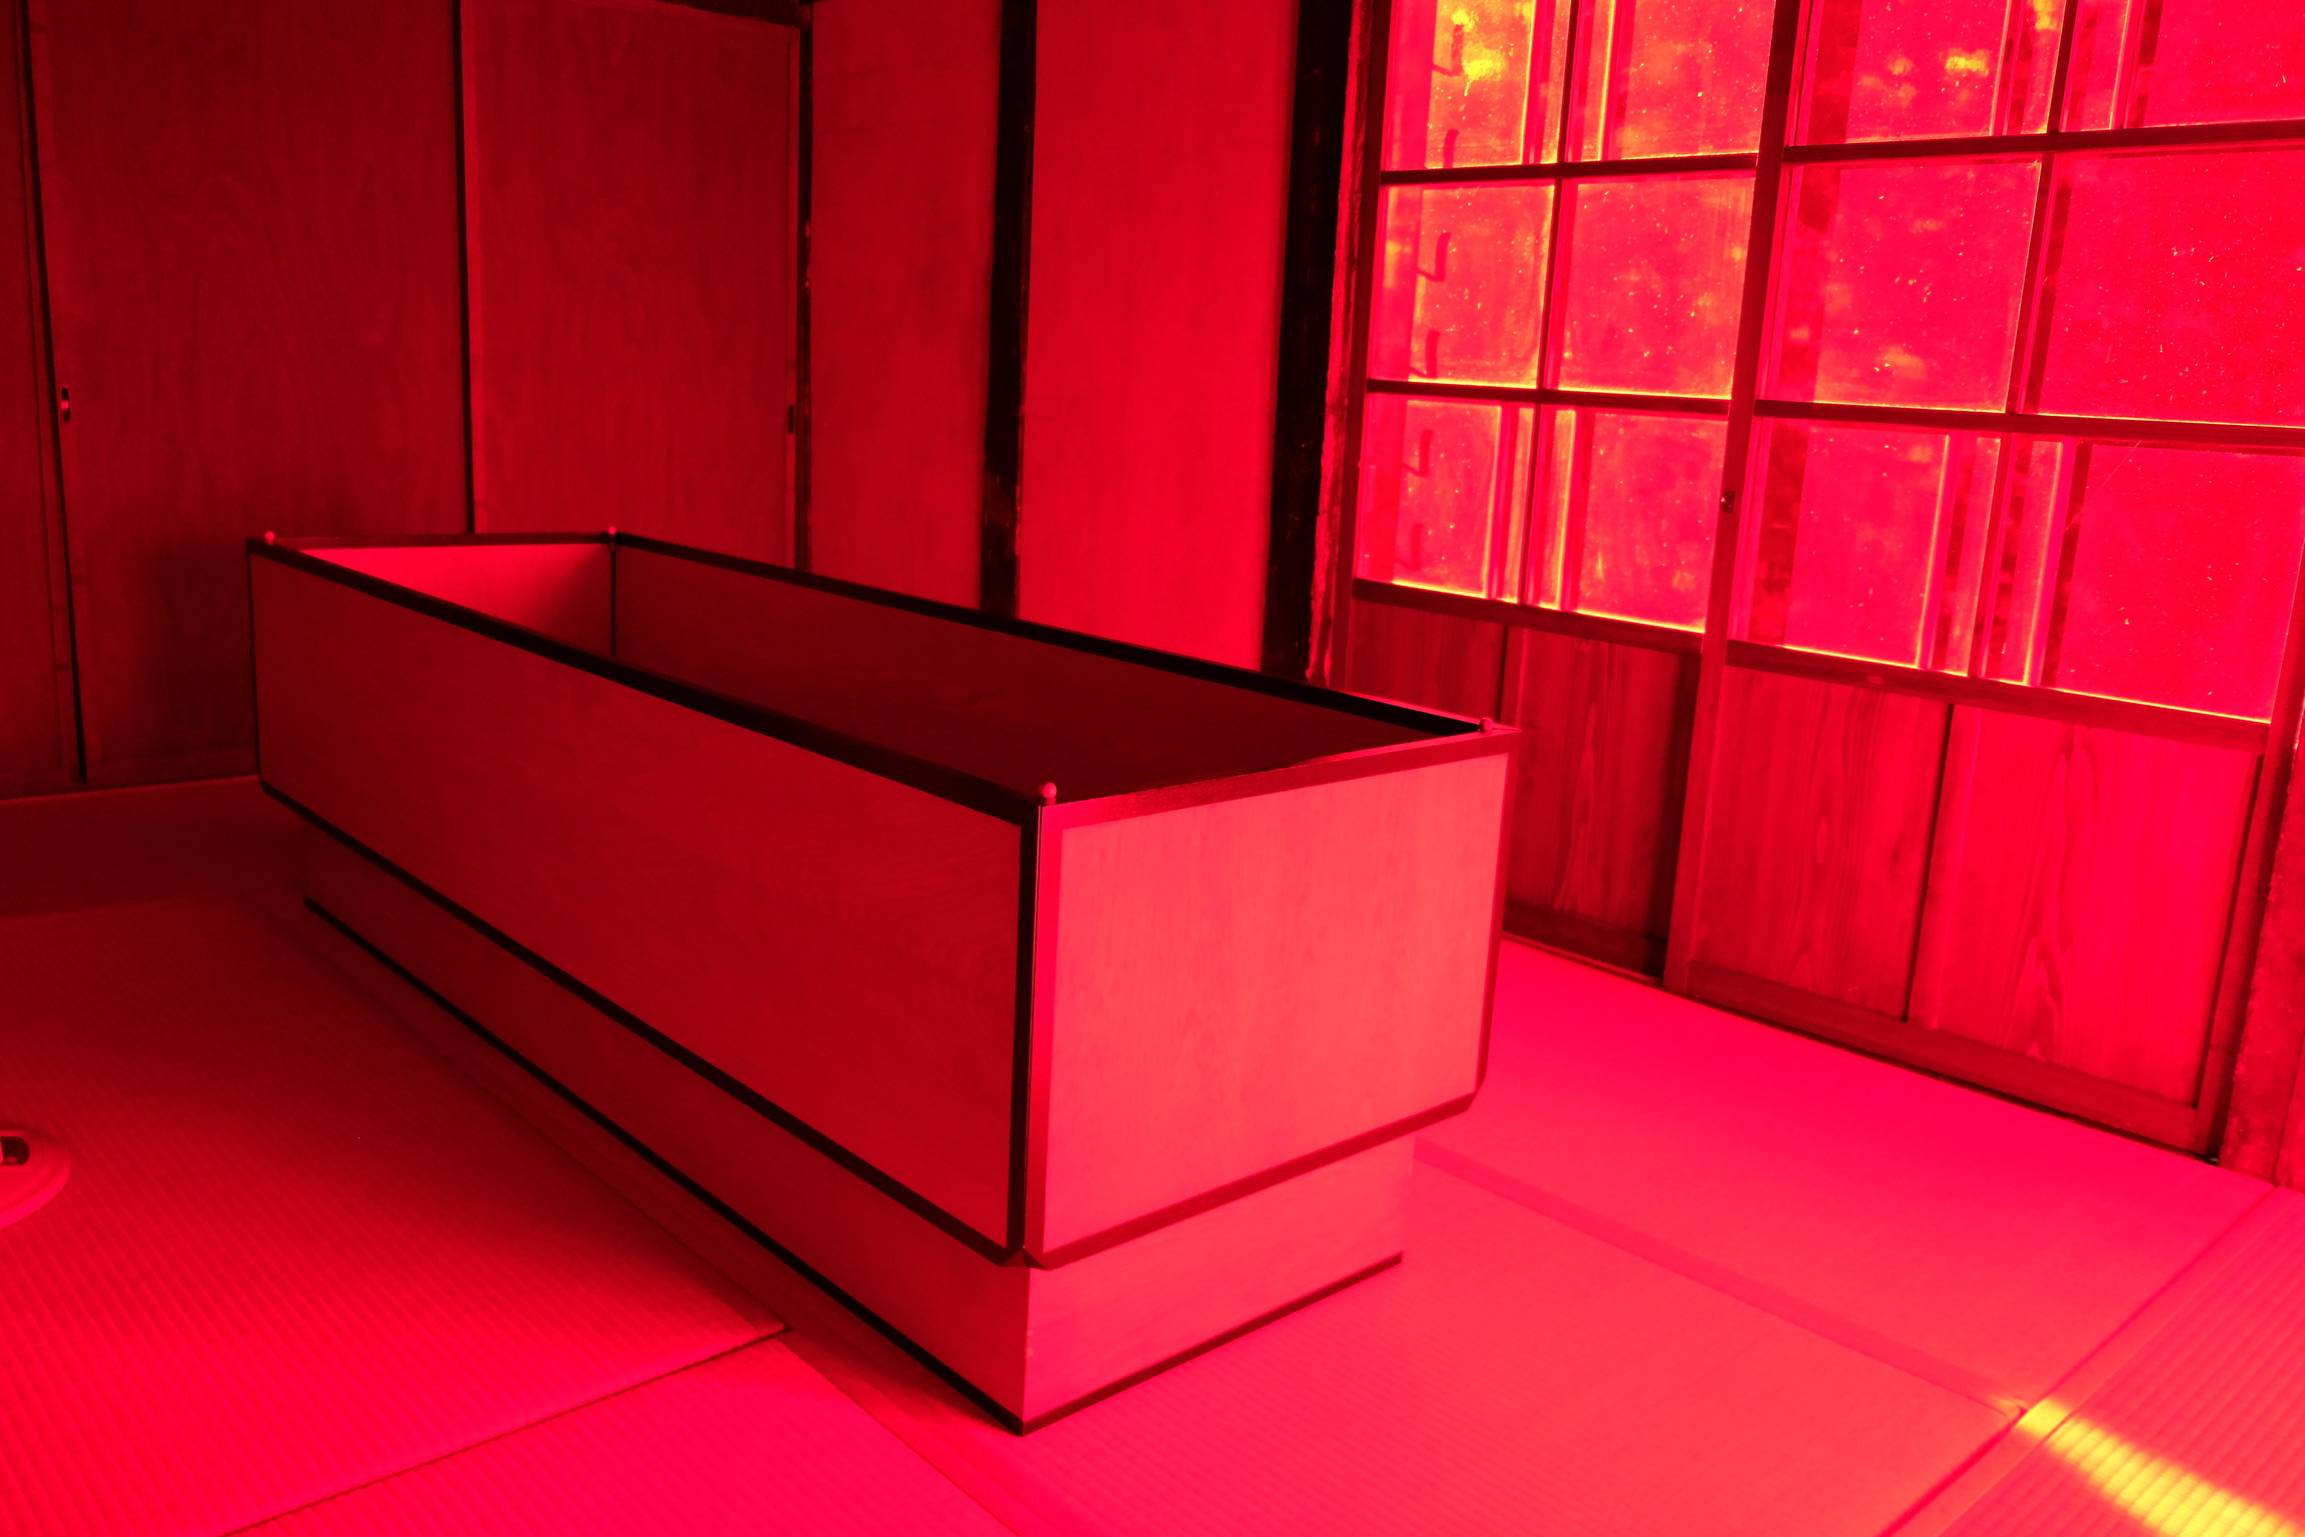 During the day the red room in Marina Abramovic's Dream House was sumptuous and uplifting, but at night it looked awash with blood. | ANDREA JUNG-AN LIU